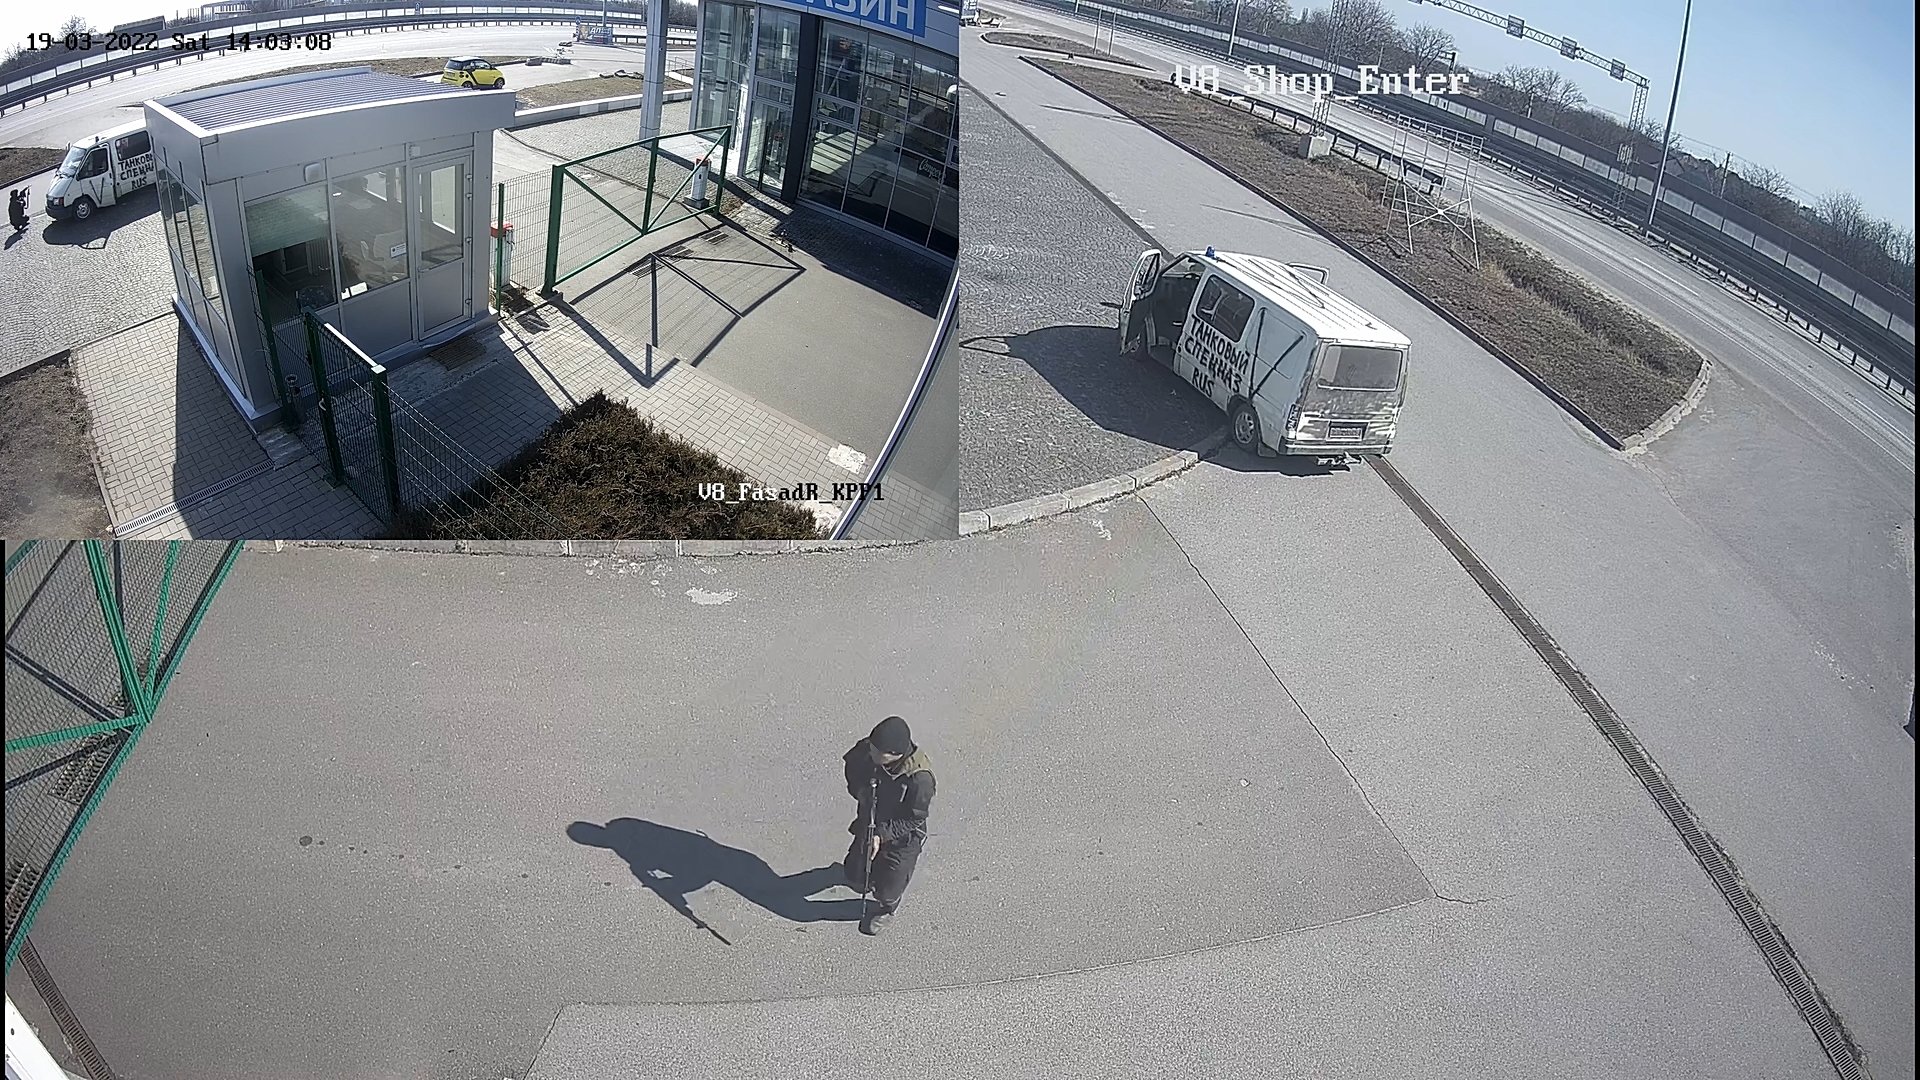 19 March 2022. The Russian military arrives in Serhii Kabashny's Ford Transit at the Camper Group car dealership. The footage shows a V mark on the roof and side of the car, as well as the signature "TANK SPETNAZ RUS". Photo: DENOTAT documentary group